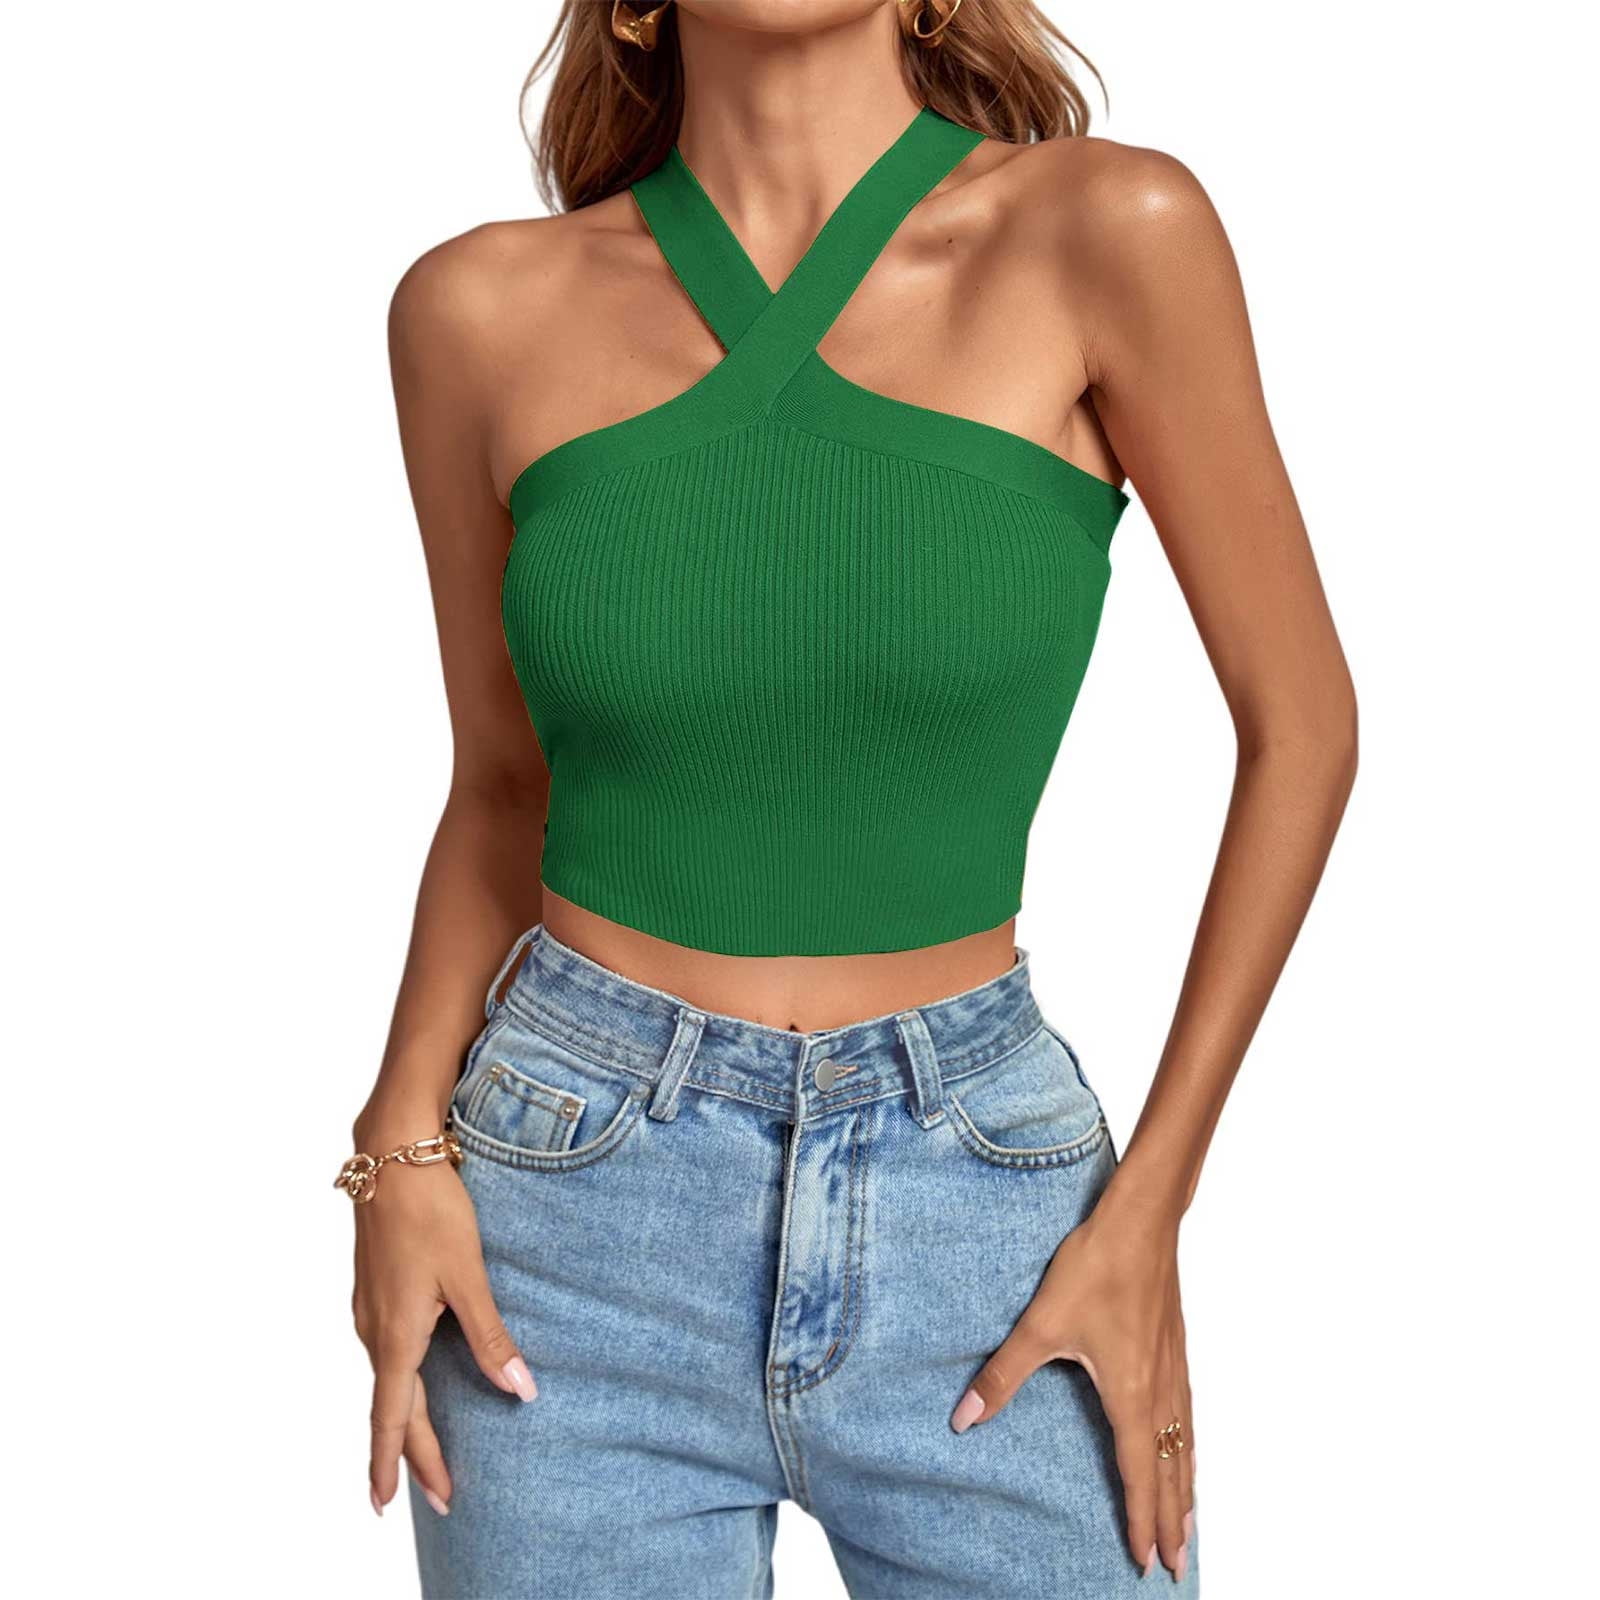 KEEPBEAUTY Womens Halter Tops Summer Sleeveless Shirts Sexy High Neck  Fitted Tops Racer Back Tank Tops Blouses Army Green at  Women's  Clothing store